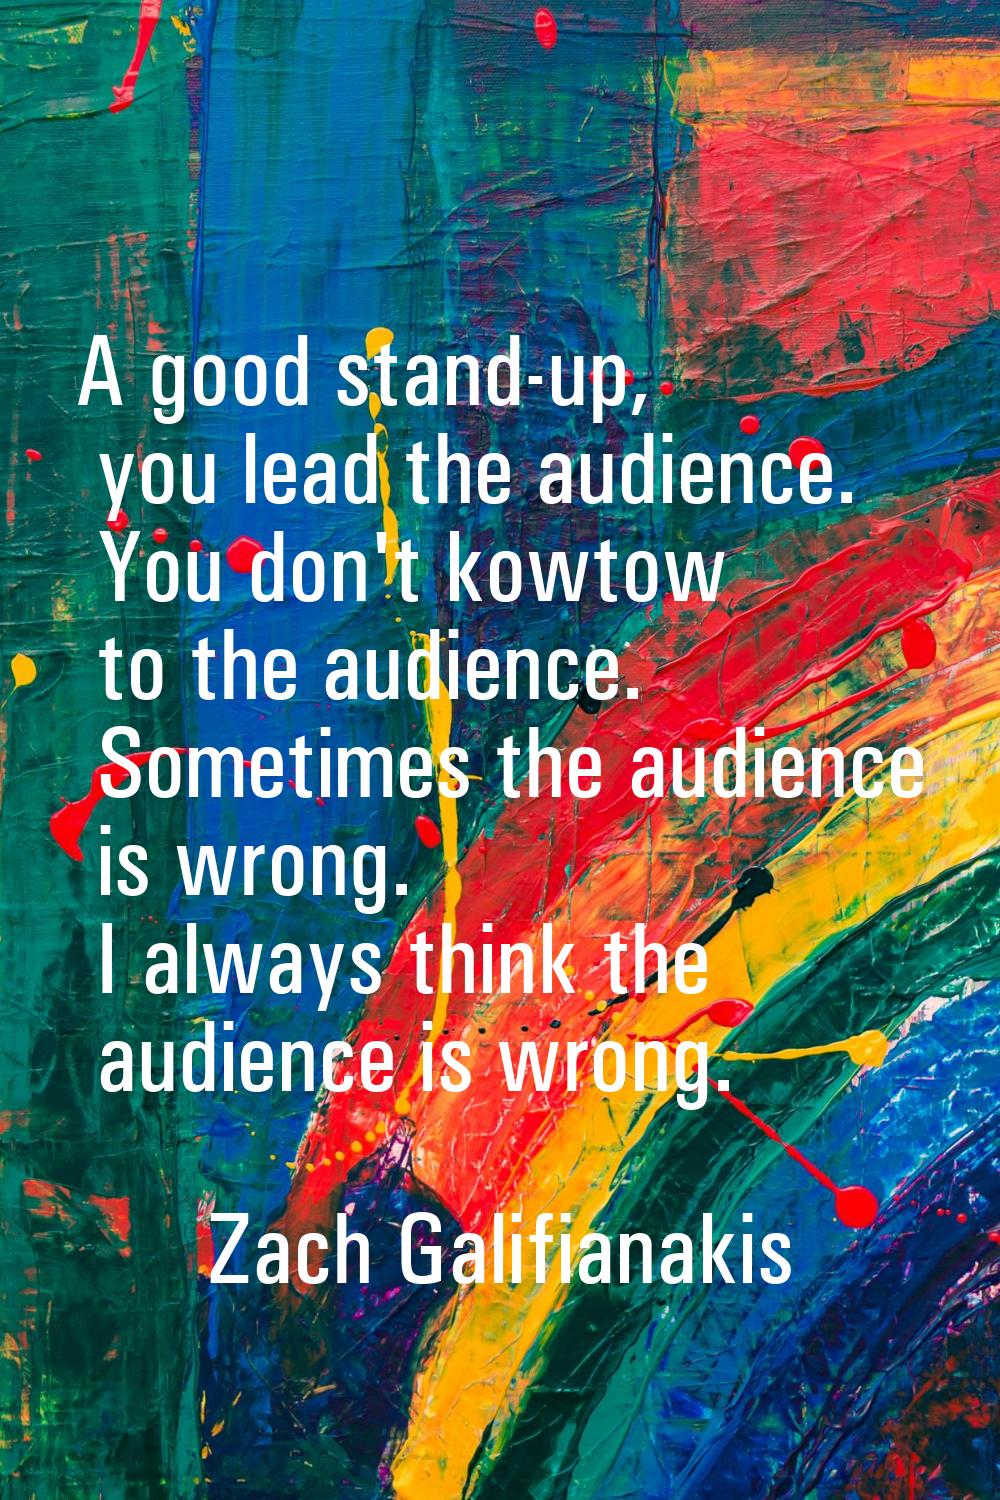 A good stand-up, you lead the audience. You don't kowtow to the audience. Sometimes the audience is